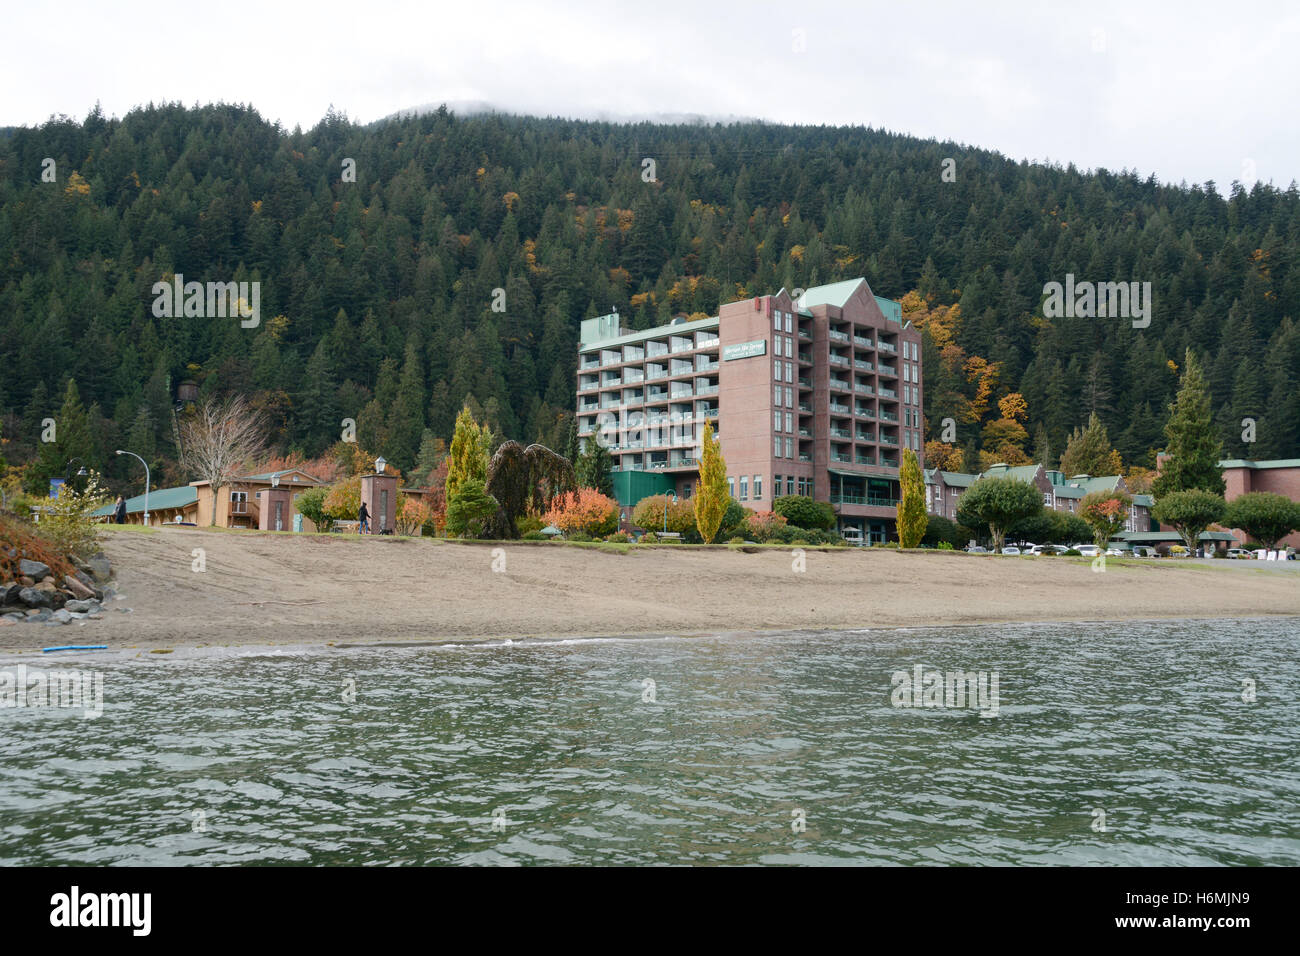 The Harrison Hot Springs Resort Hotel and Spa, located on the shores of Harrison Lake, British Columbia, Canada. Stock Photo